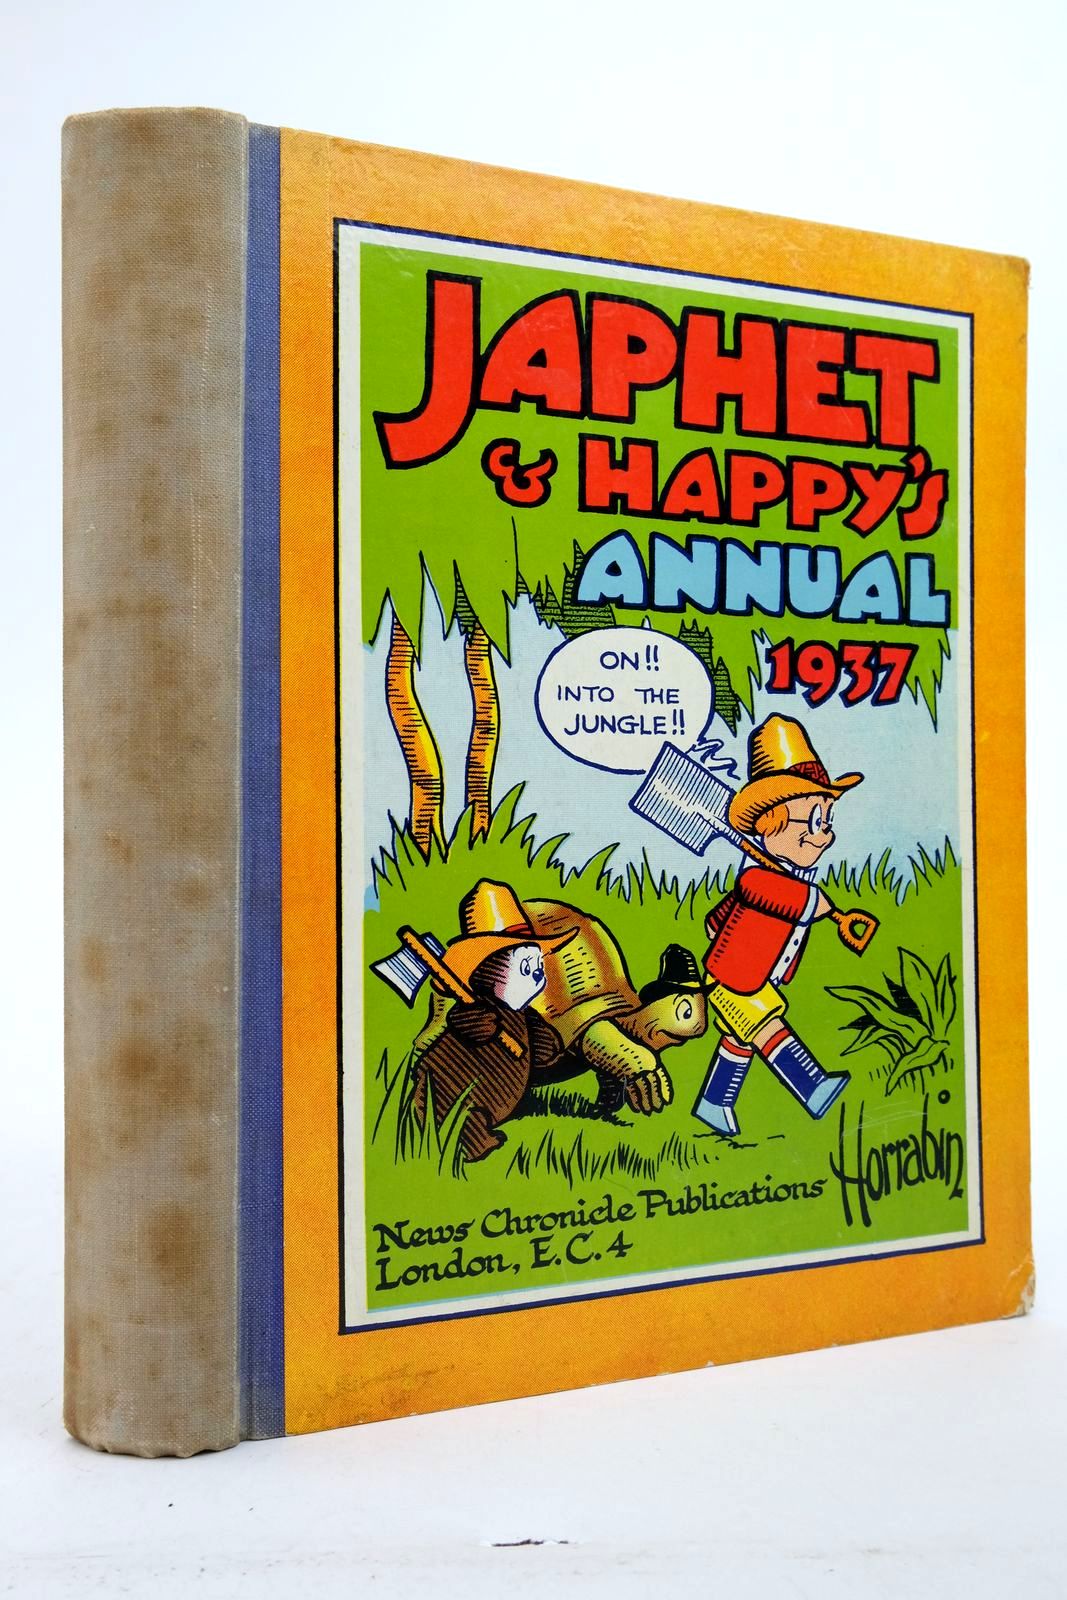 Photo of JAPHET AND HAPPY'S ANNUAL 1937 written by Horrabin, J.F. illustrated by Horrabin, J.F. published by News Chronicle (STOCK CODE: 2139483)  for sale by Stella & Rose's Books